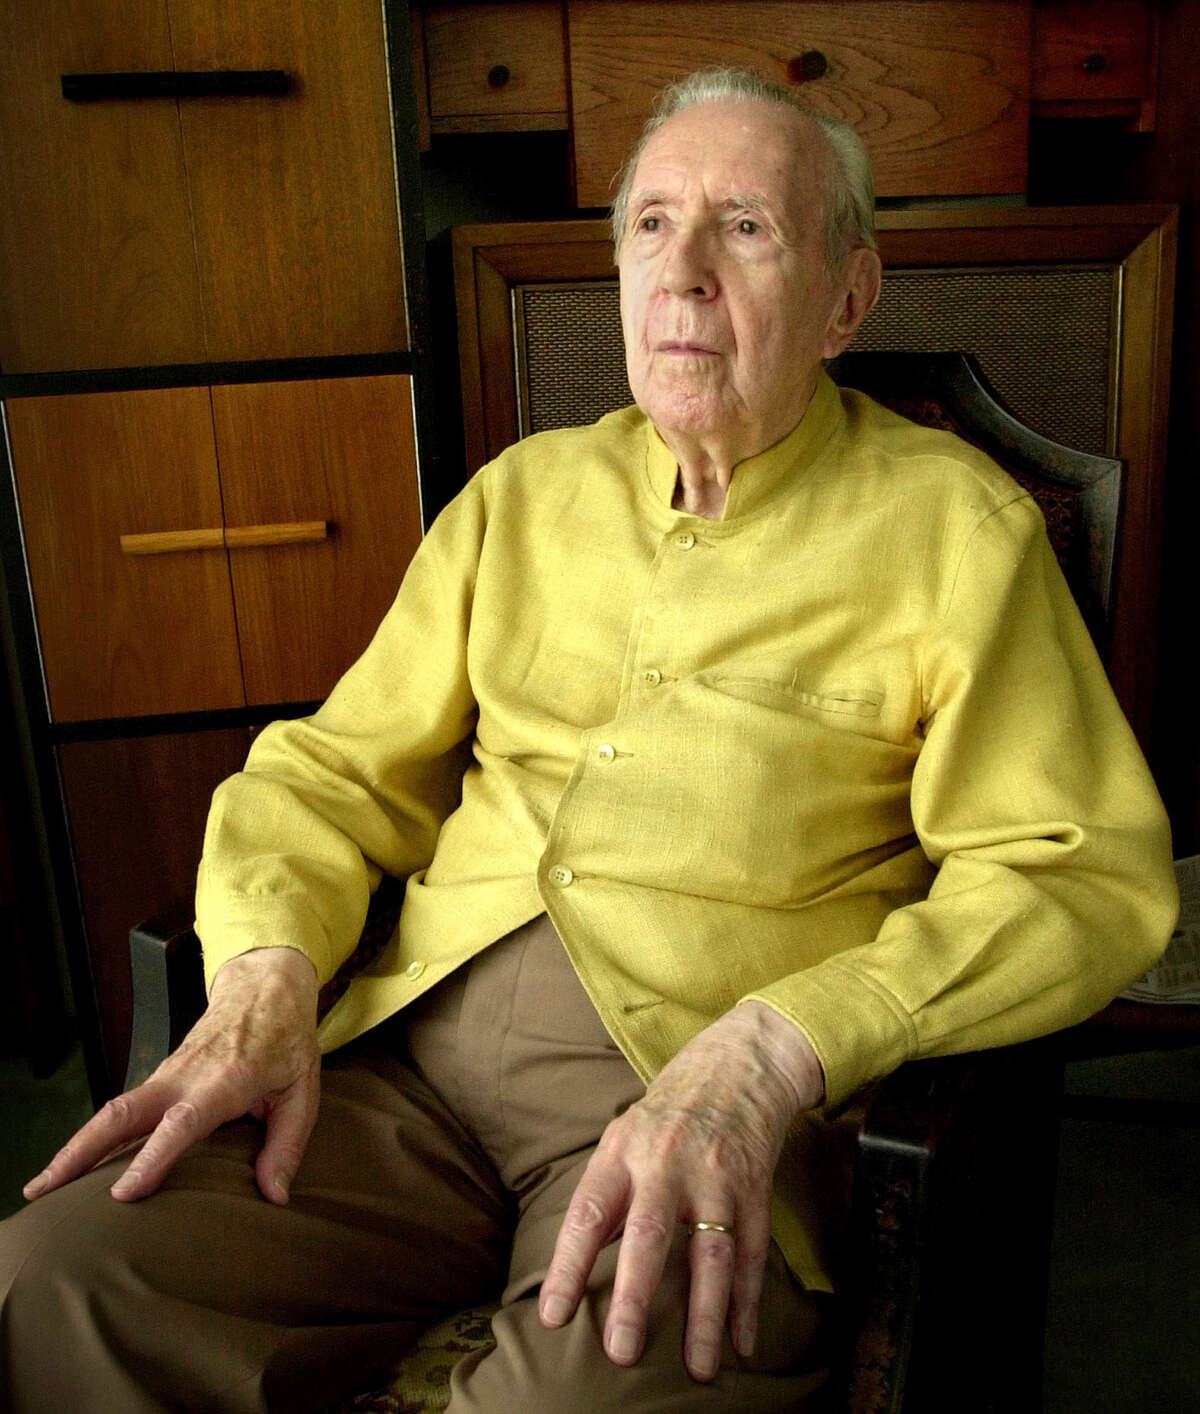 In this Sept. 17, 2002 file photo, Jacques Barzun sits for a portrait at his home in San Antonio. Barzun, the pioneering cultural historian who became a best-selling author in his 90s with "From Dawn to Decadence," has died. He was 104. Barzun's son-in-law says Barzun passed away Thursday, Oct. 25, 2012, in San Antonio, where he'd lived in recent years. Barzun wrote dozens of books and essays on everything from philosophy and music to detective novels. (AP Photo/Eric Gay)